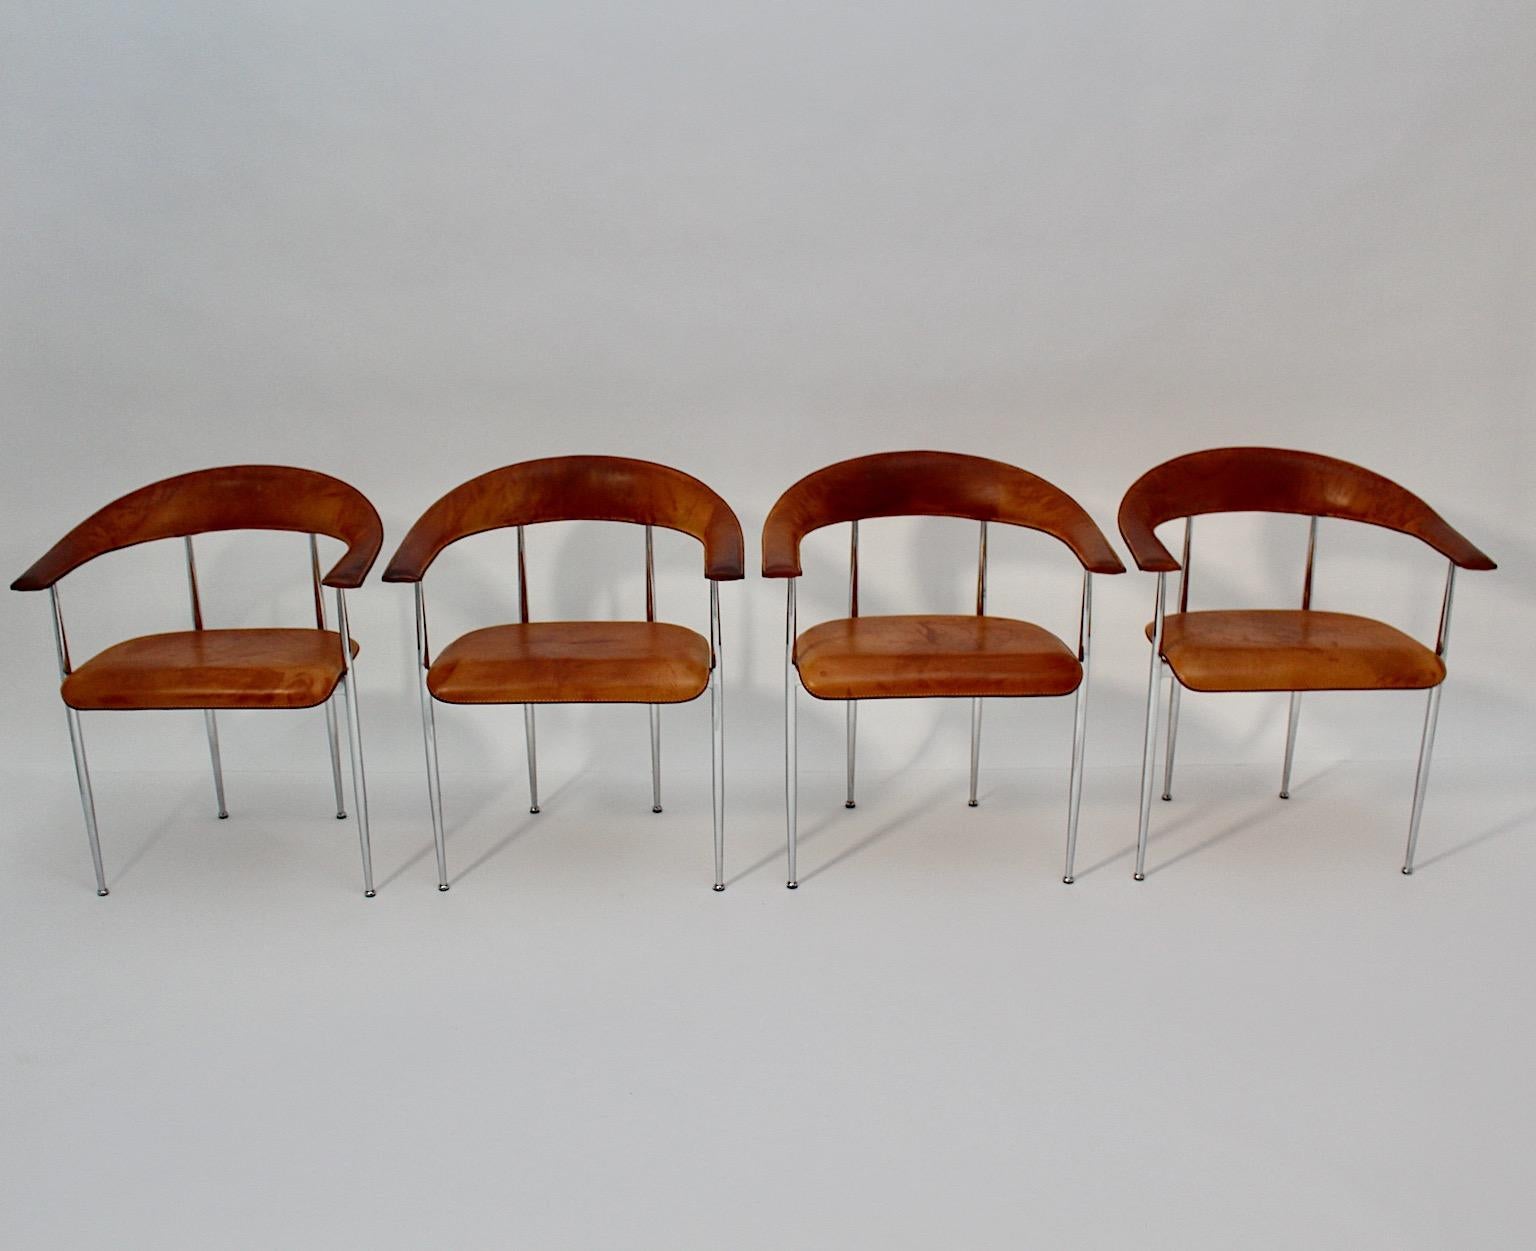 Modernist vintage four ( 4 ) dining chairs or armchairs from cognac brown leather and chromed base by Fasem, Italy 1980s.
A beautiful set of four ( 4 ) dining chairs or armchairs from thick stitched leather in cognac brown color with chromed metal